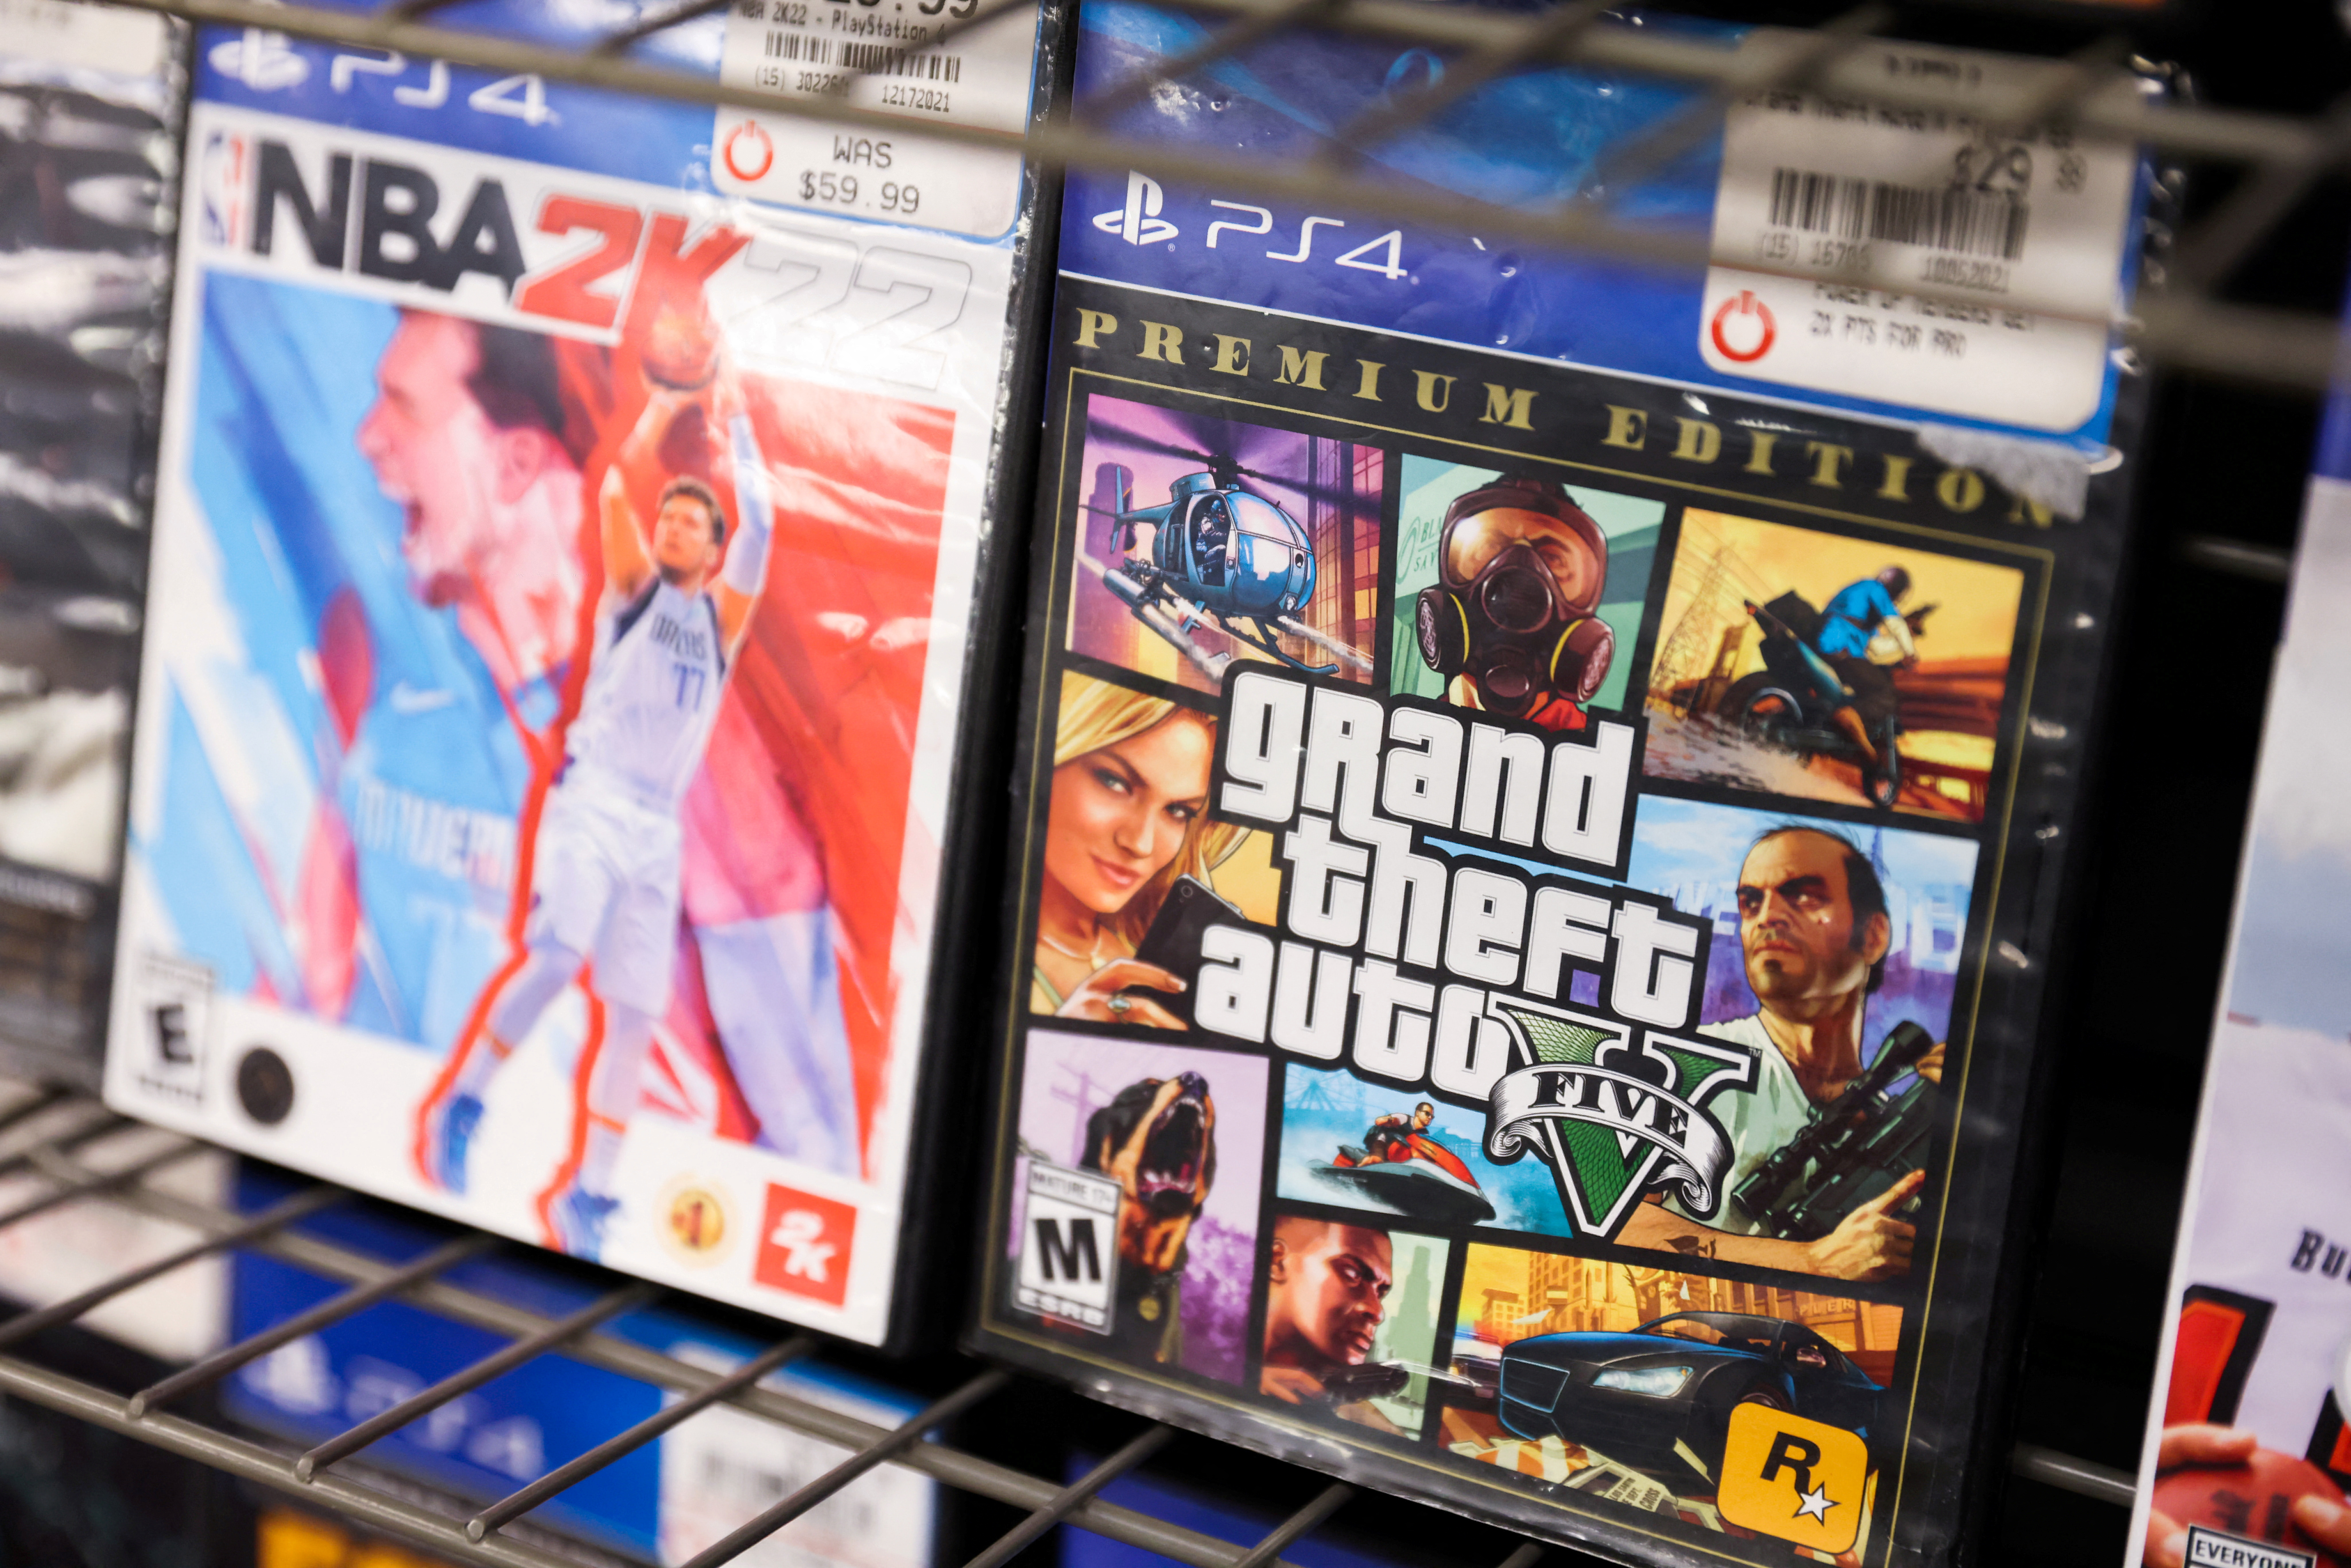  Grand Theft Auto V - PlayStation 5 : Take 2 Interactive: Video  Games